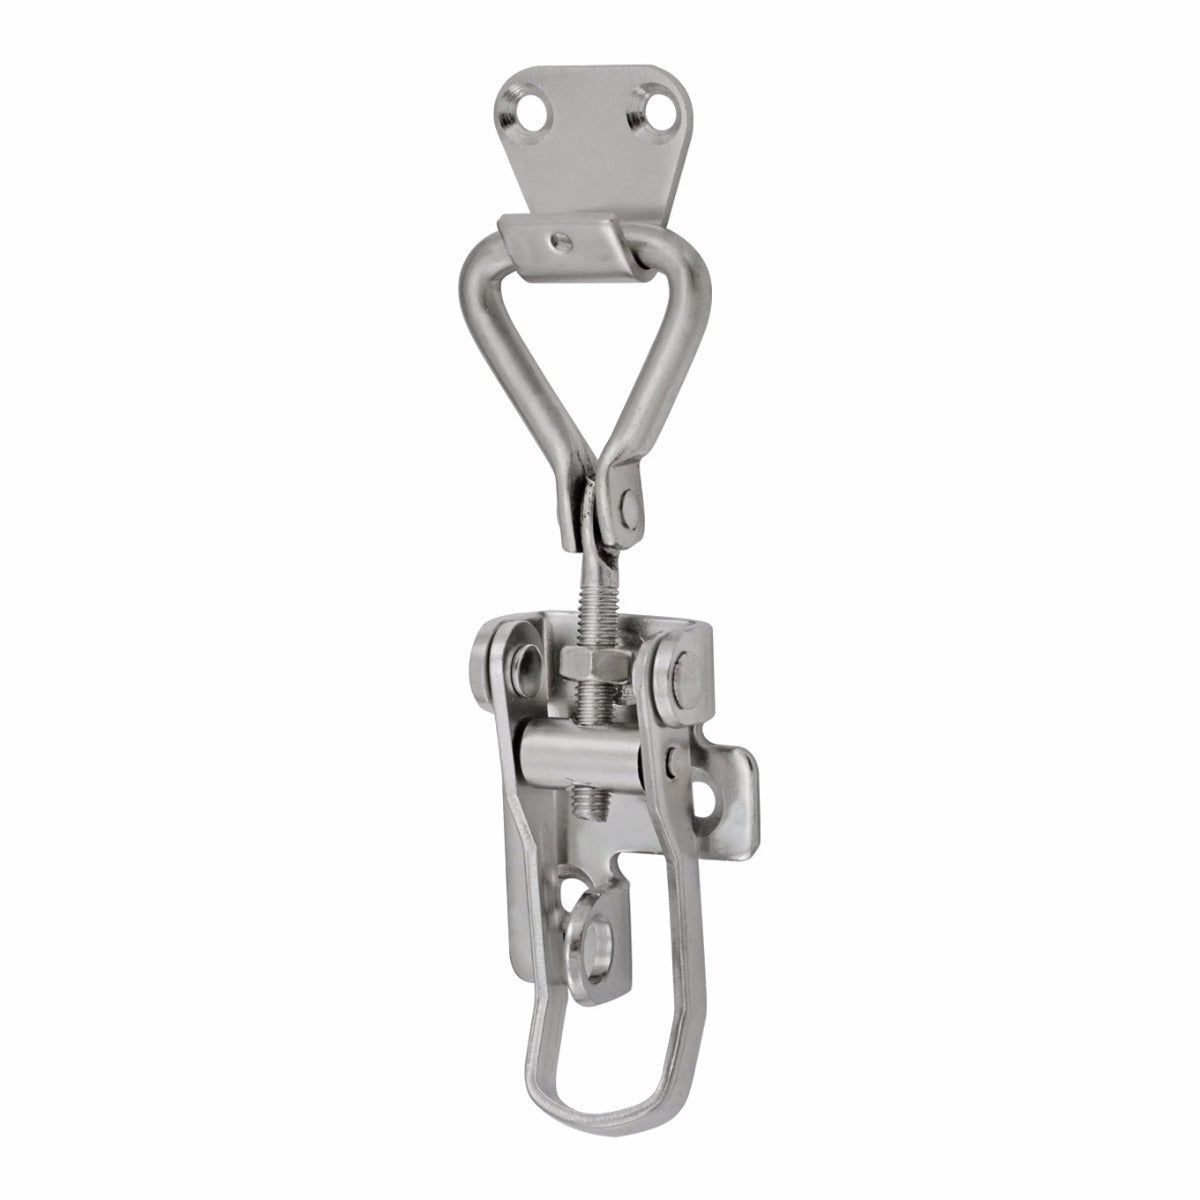 Stainless Steel Lockable Draw Pull Catch